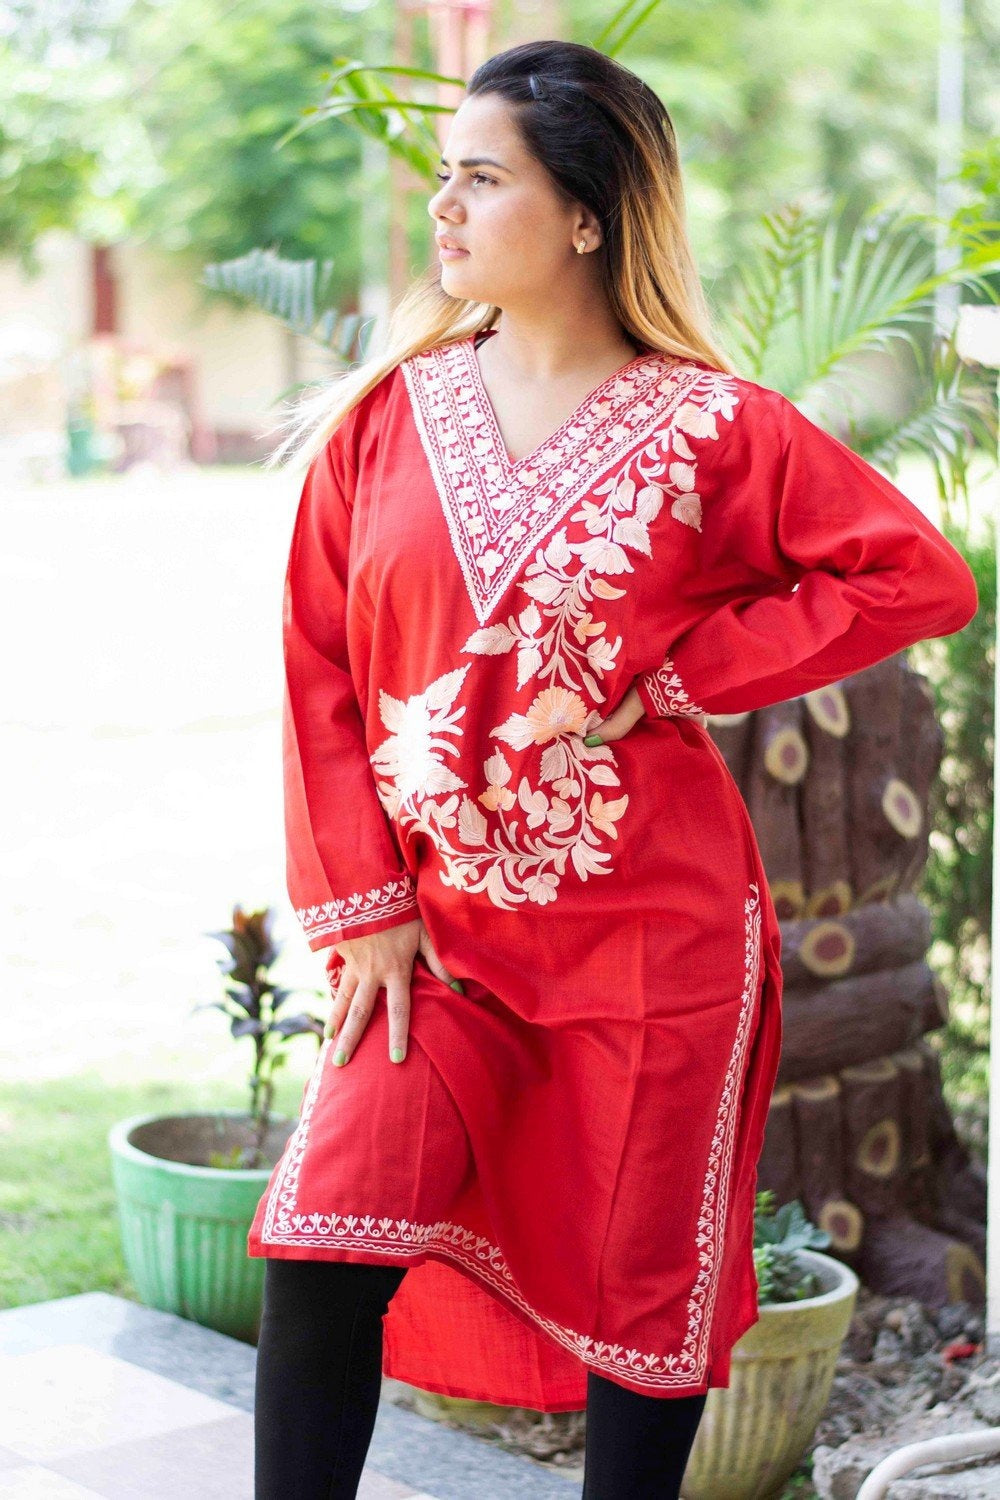 Red Colour Cotton Kurti With Beautiful Aari Embroidery Gives